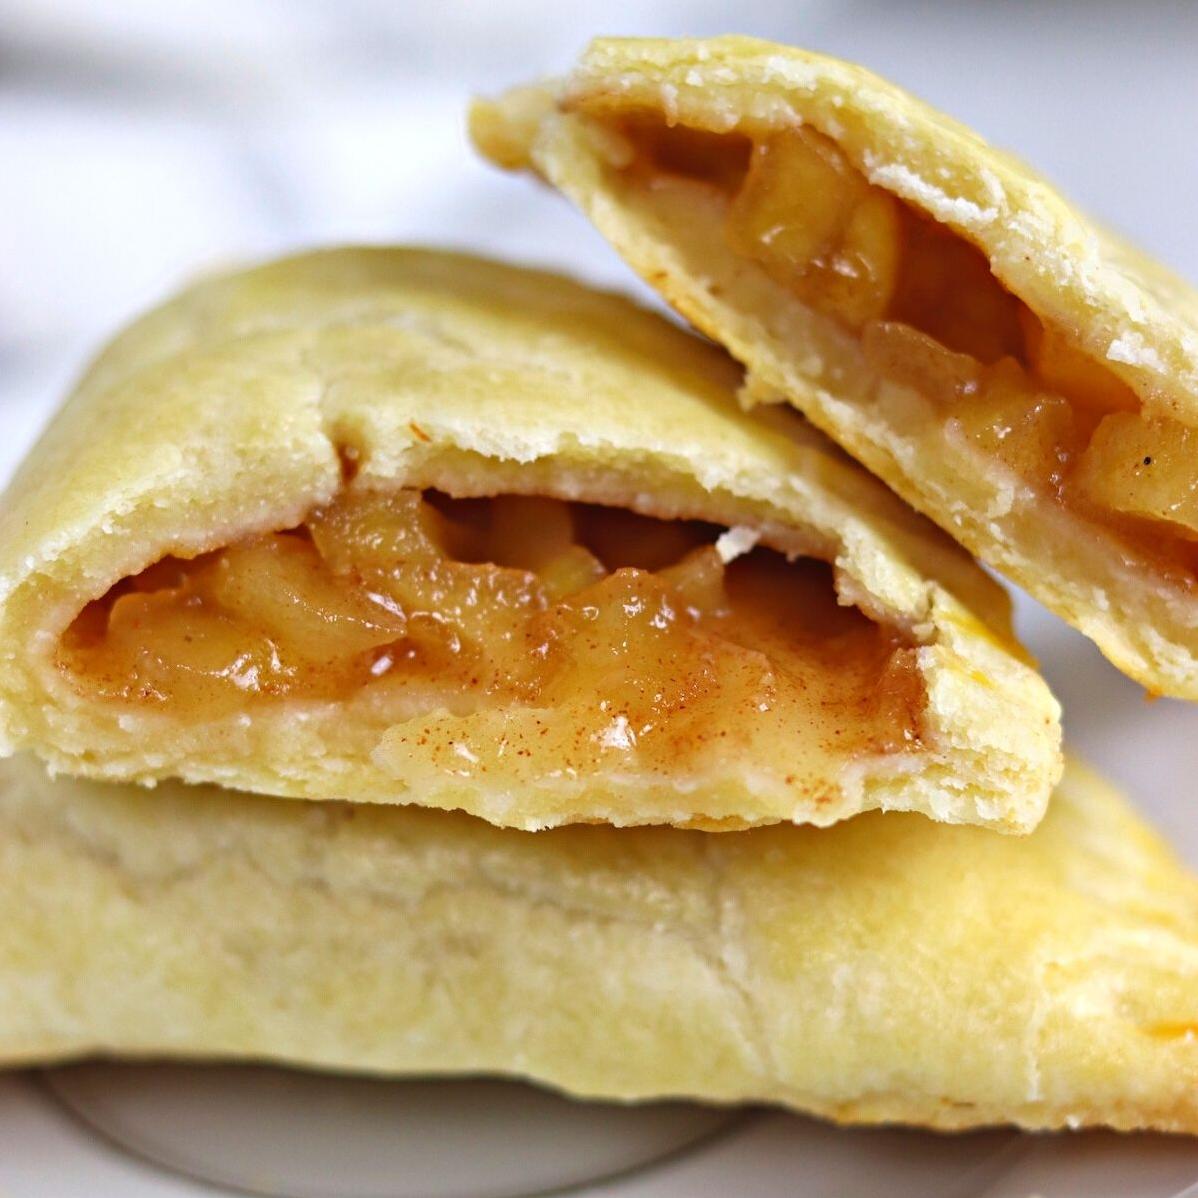  Get ready to make your taste buds dance with these sweet apple and cinnamon empanadas!